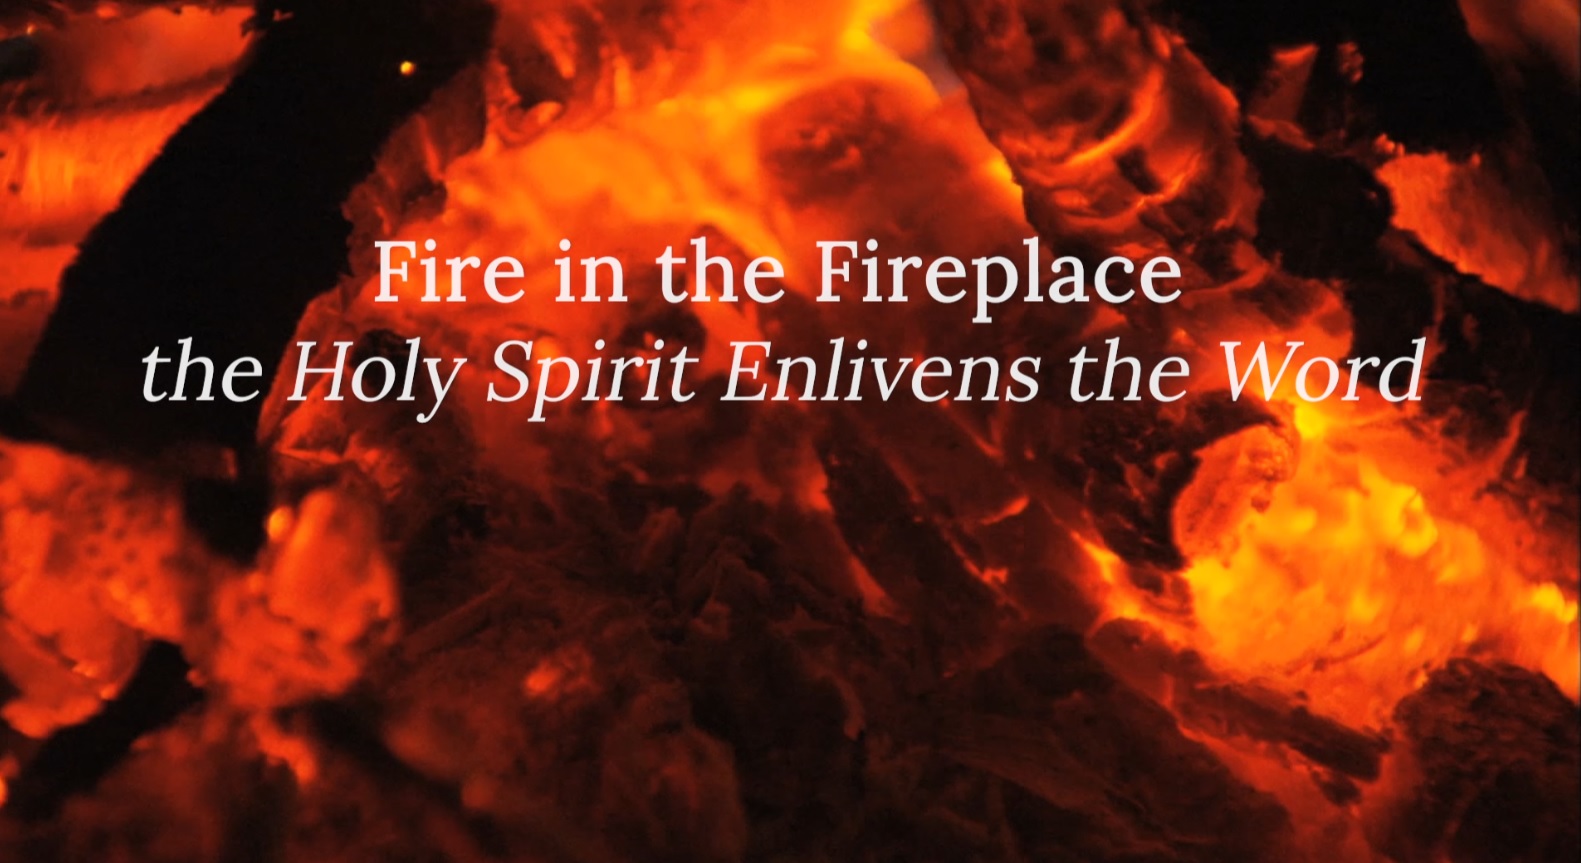 Fire in the Fireplace: The Holy Spirit Enlivens the Word